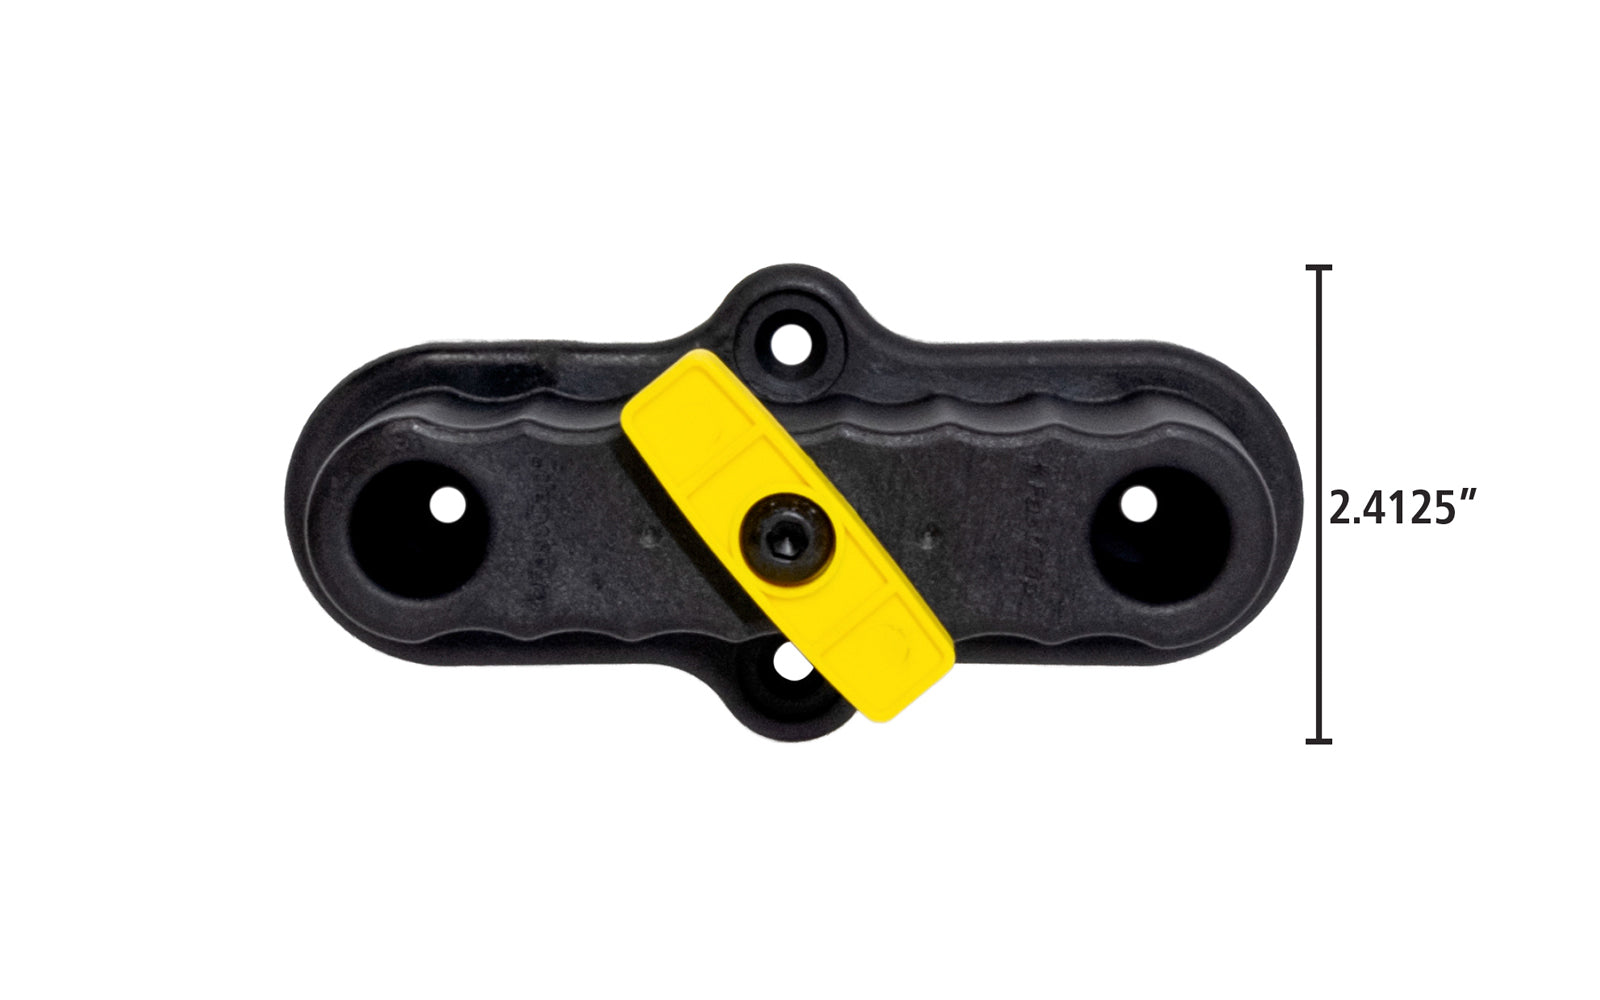 FastCap Level Rack is an innovative solution to securely & safely store your Stabila levels. Mount most Stabila levels vertically or horizontally on drywall, bare studs, garage door panels, trailer walls, or work truck. Cam-lock provides a positive lock that holds your level tight, secure, & rattle-free. 663807030245